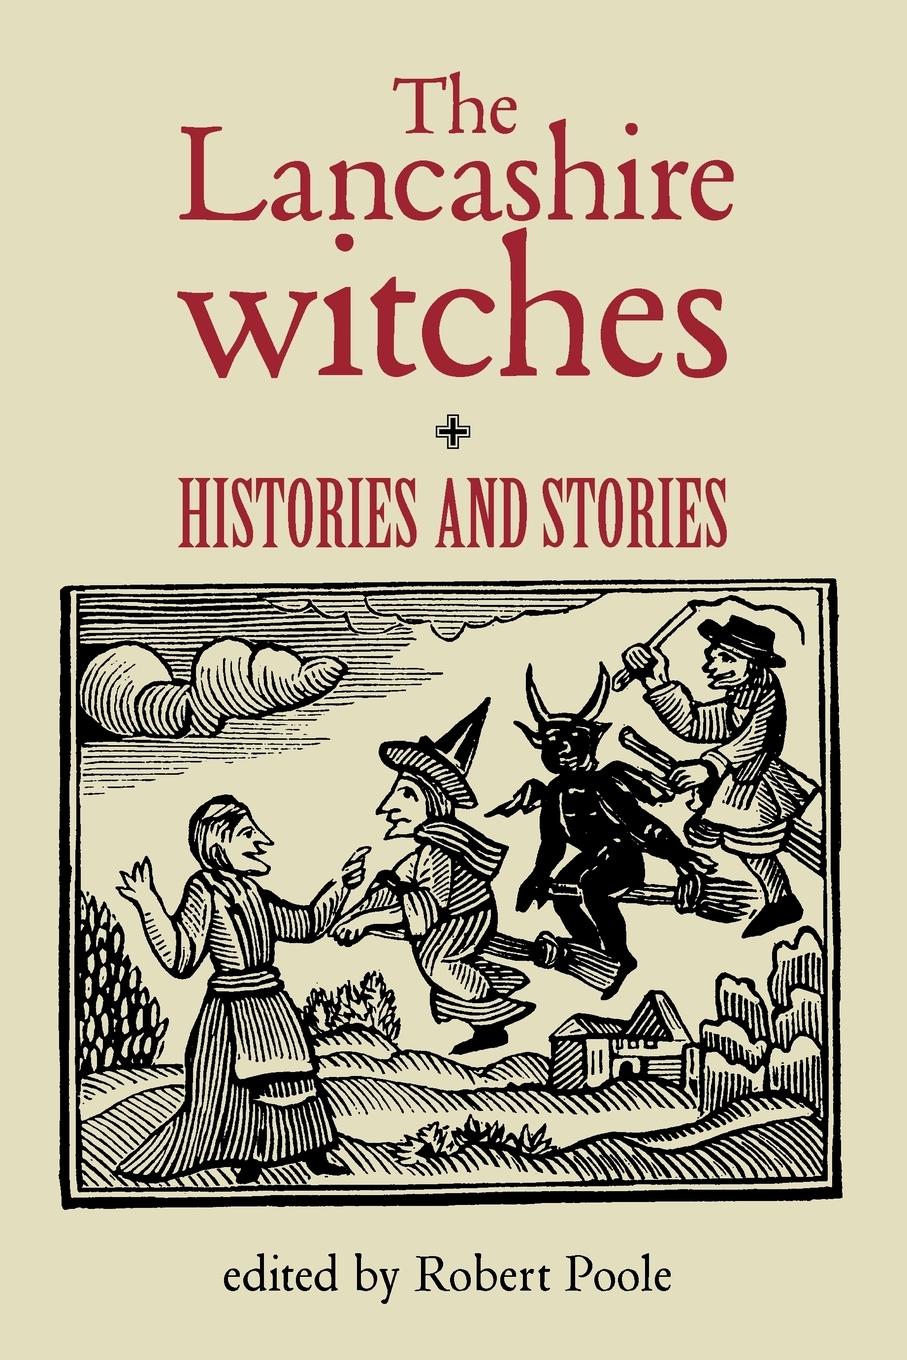 The Lancashire Witches | Histories and Stories | Robert Poole | Taschenbuch | Paperback | Englisch | 2003 | Manchester University Press | EAN 9780719062049 - Poole, Robert